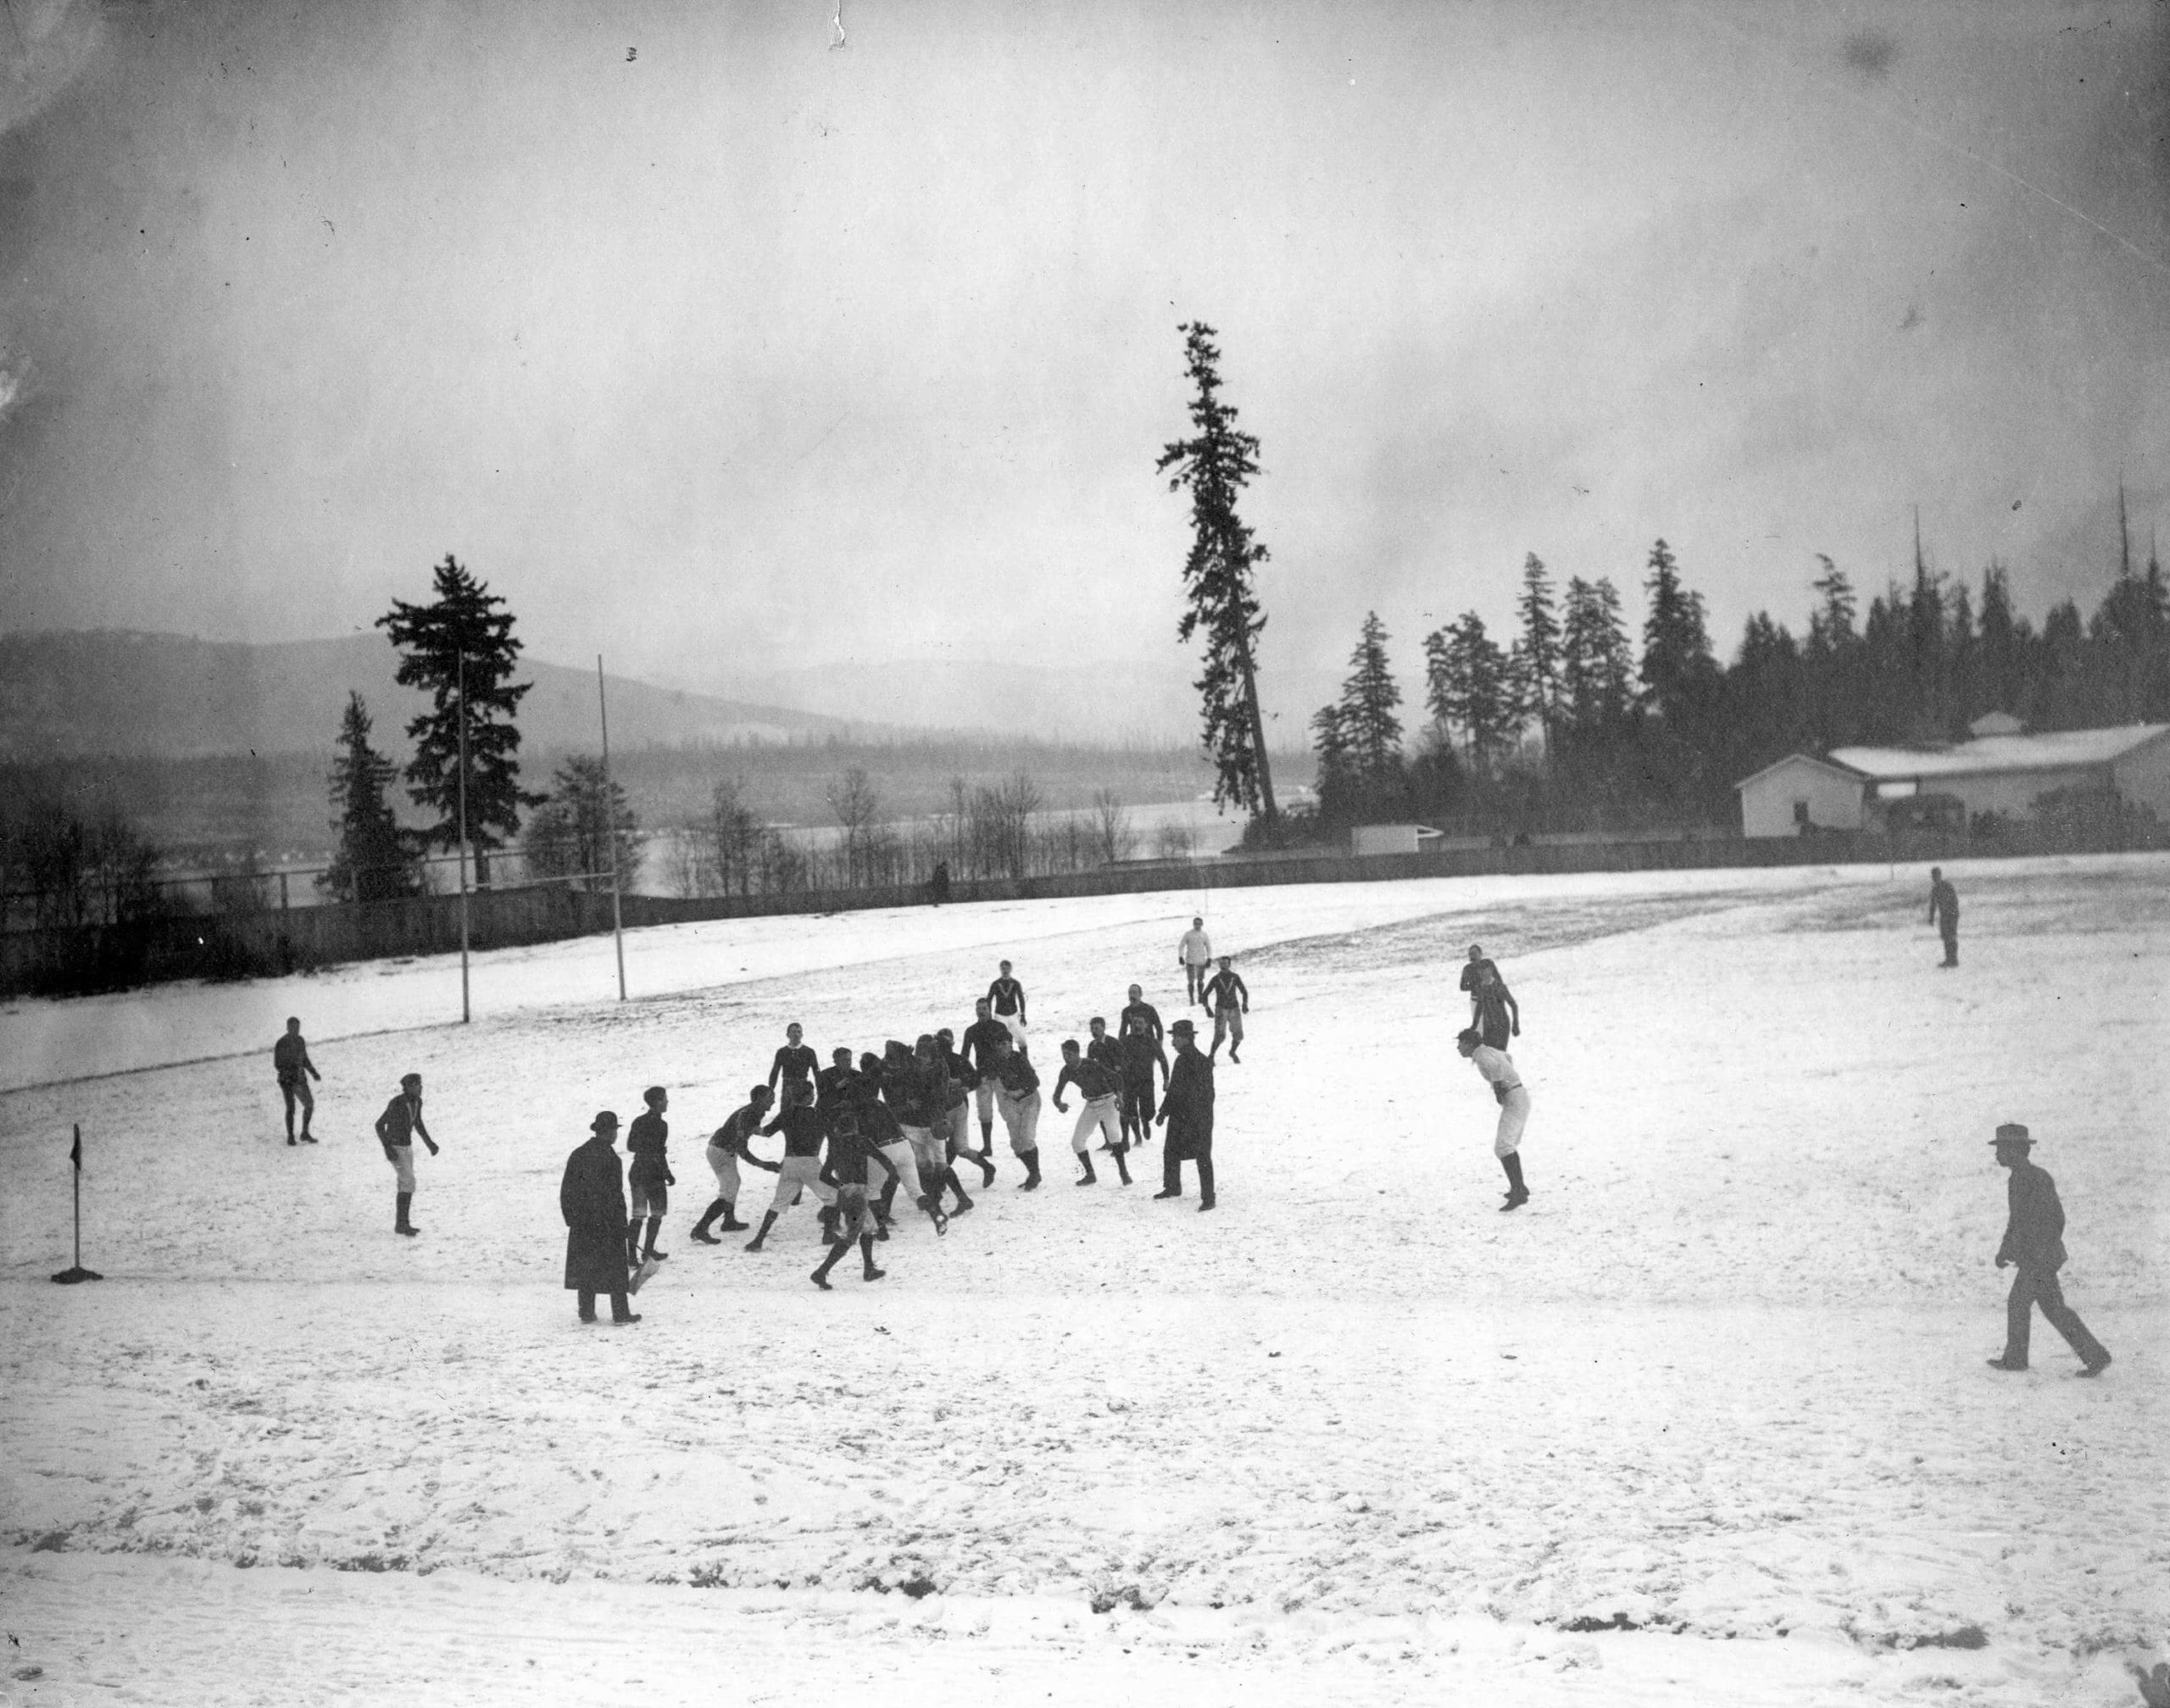 1910 - photograph showing Vancouver and Nanaimo rugby players at Brockton Oval